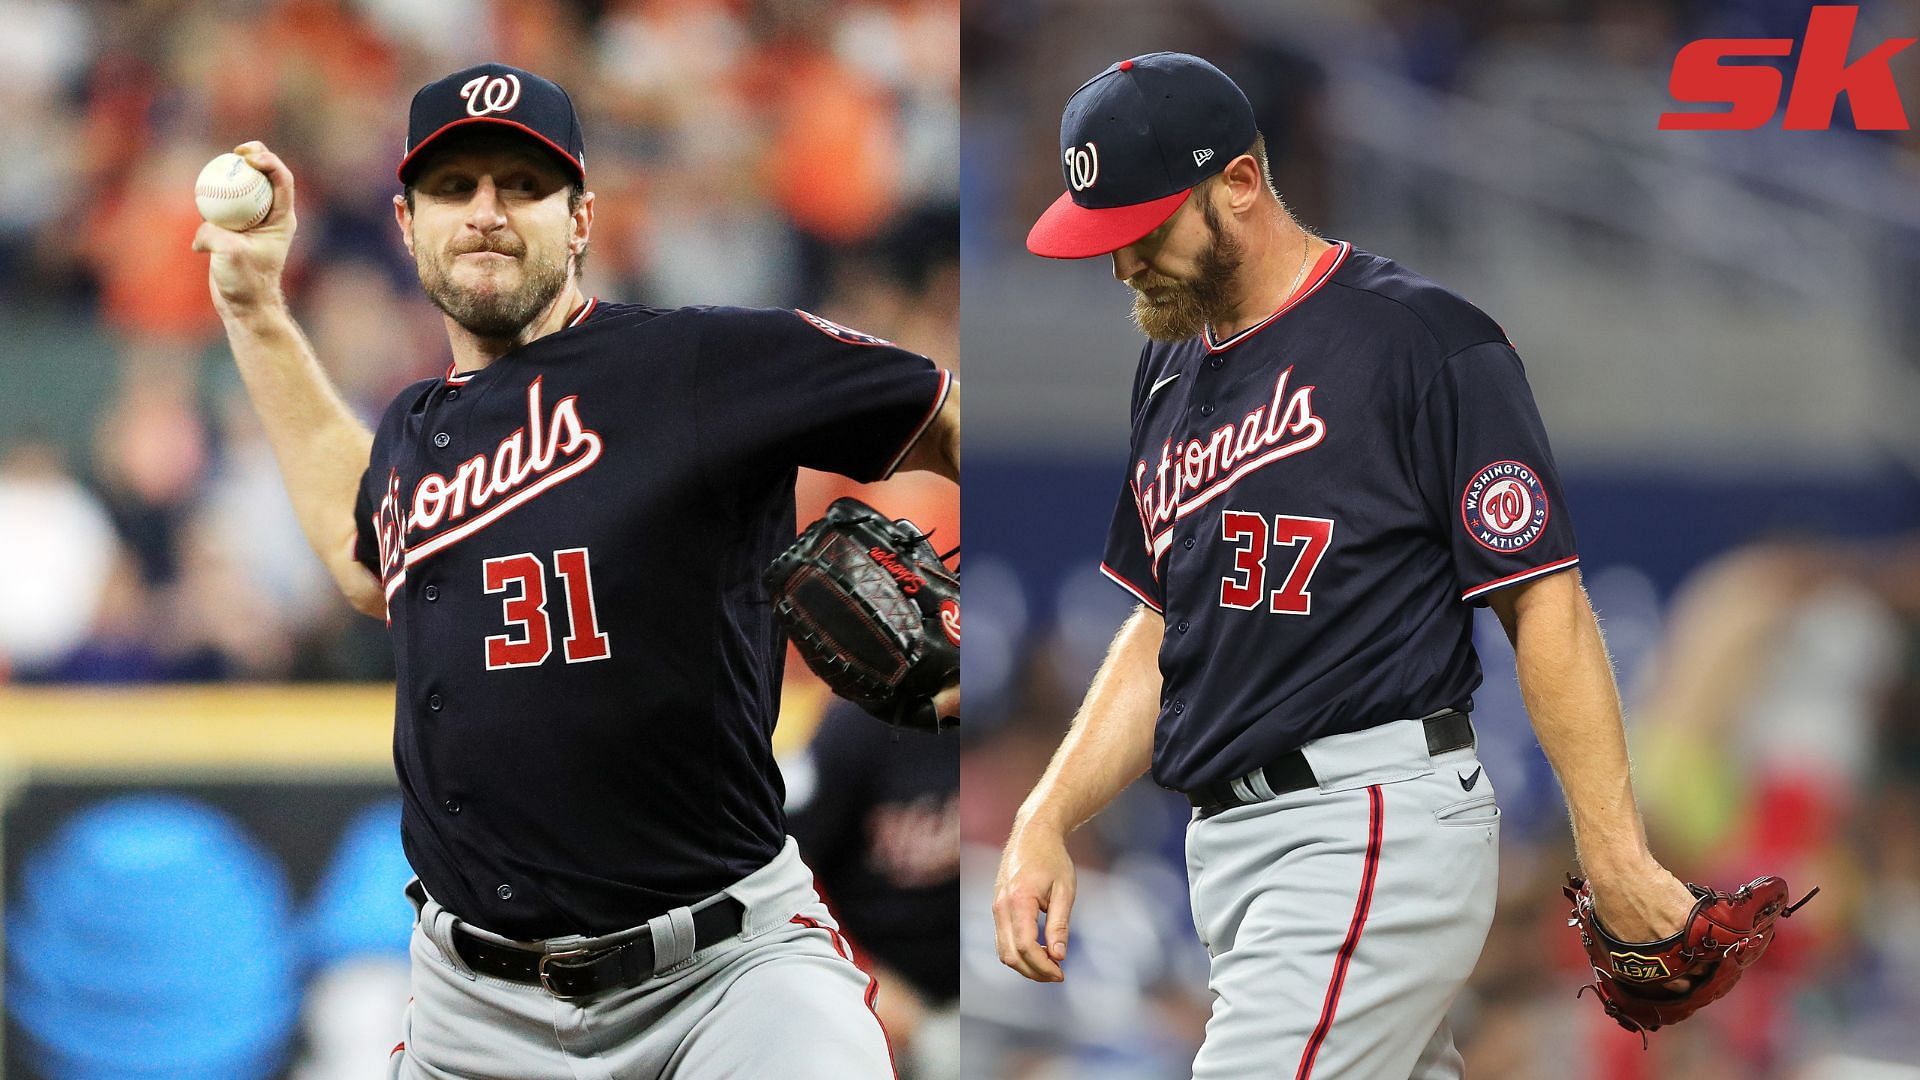 Which Nationals players have a 200+ K season? MLB Immaculate Grid answers  September 11